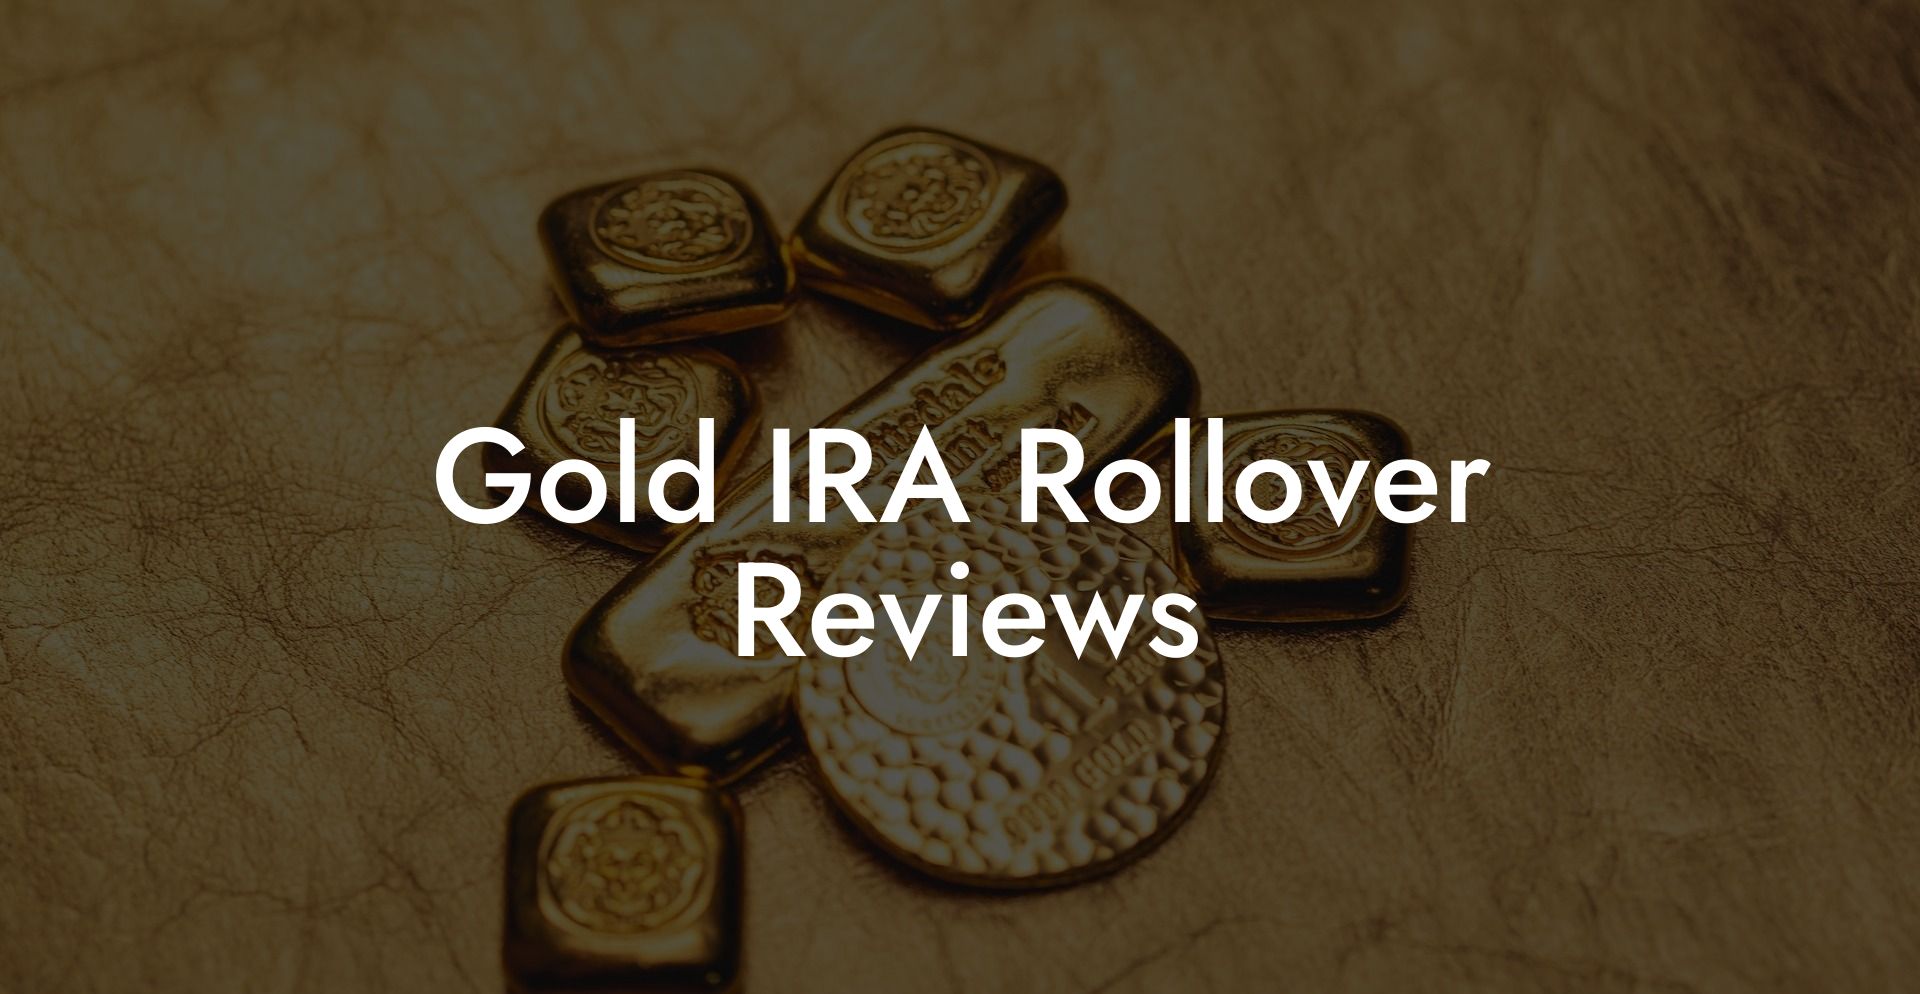 Gold IRA Rollover Reviews